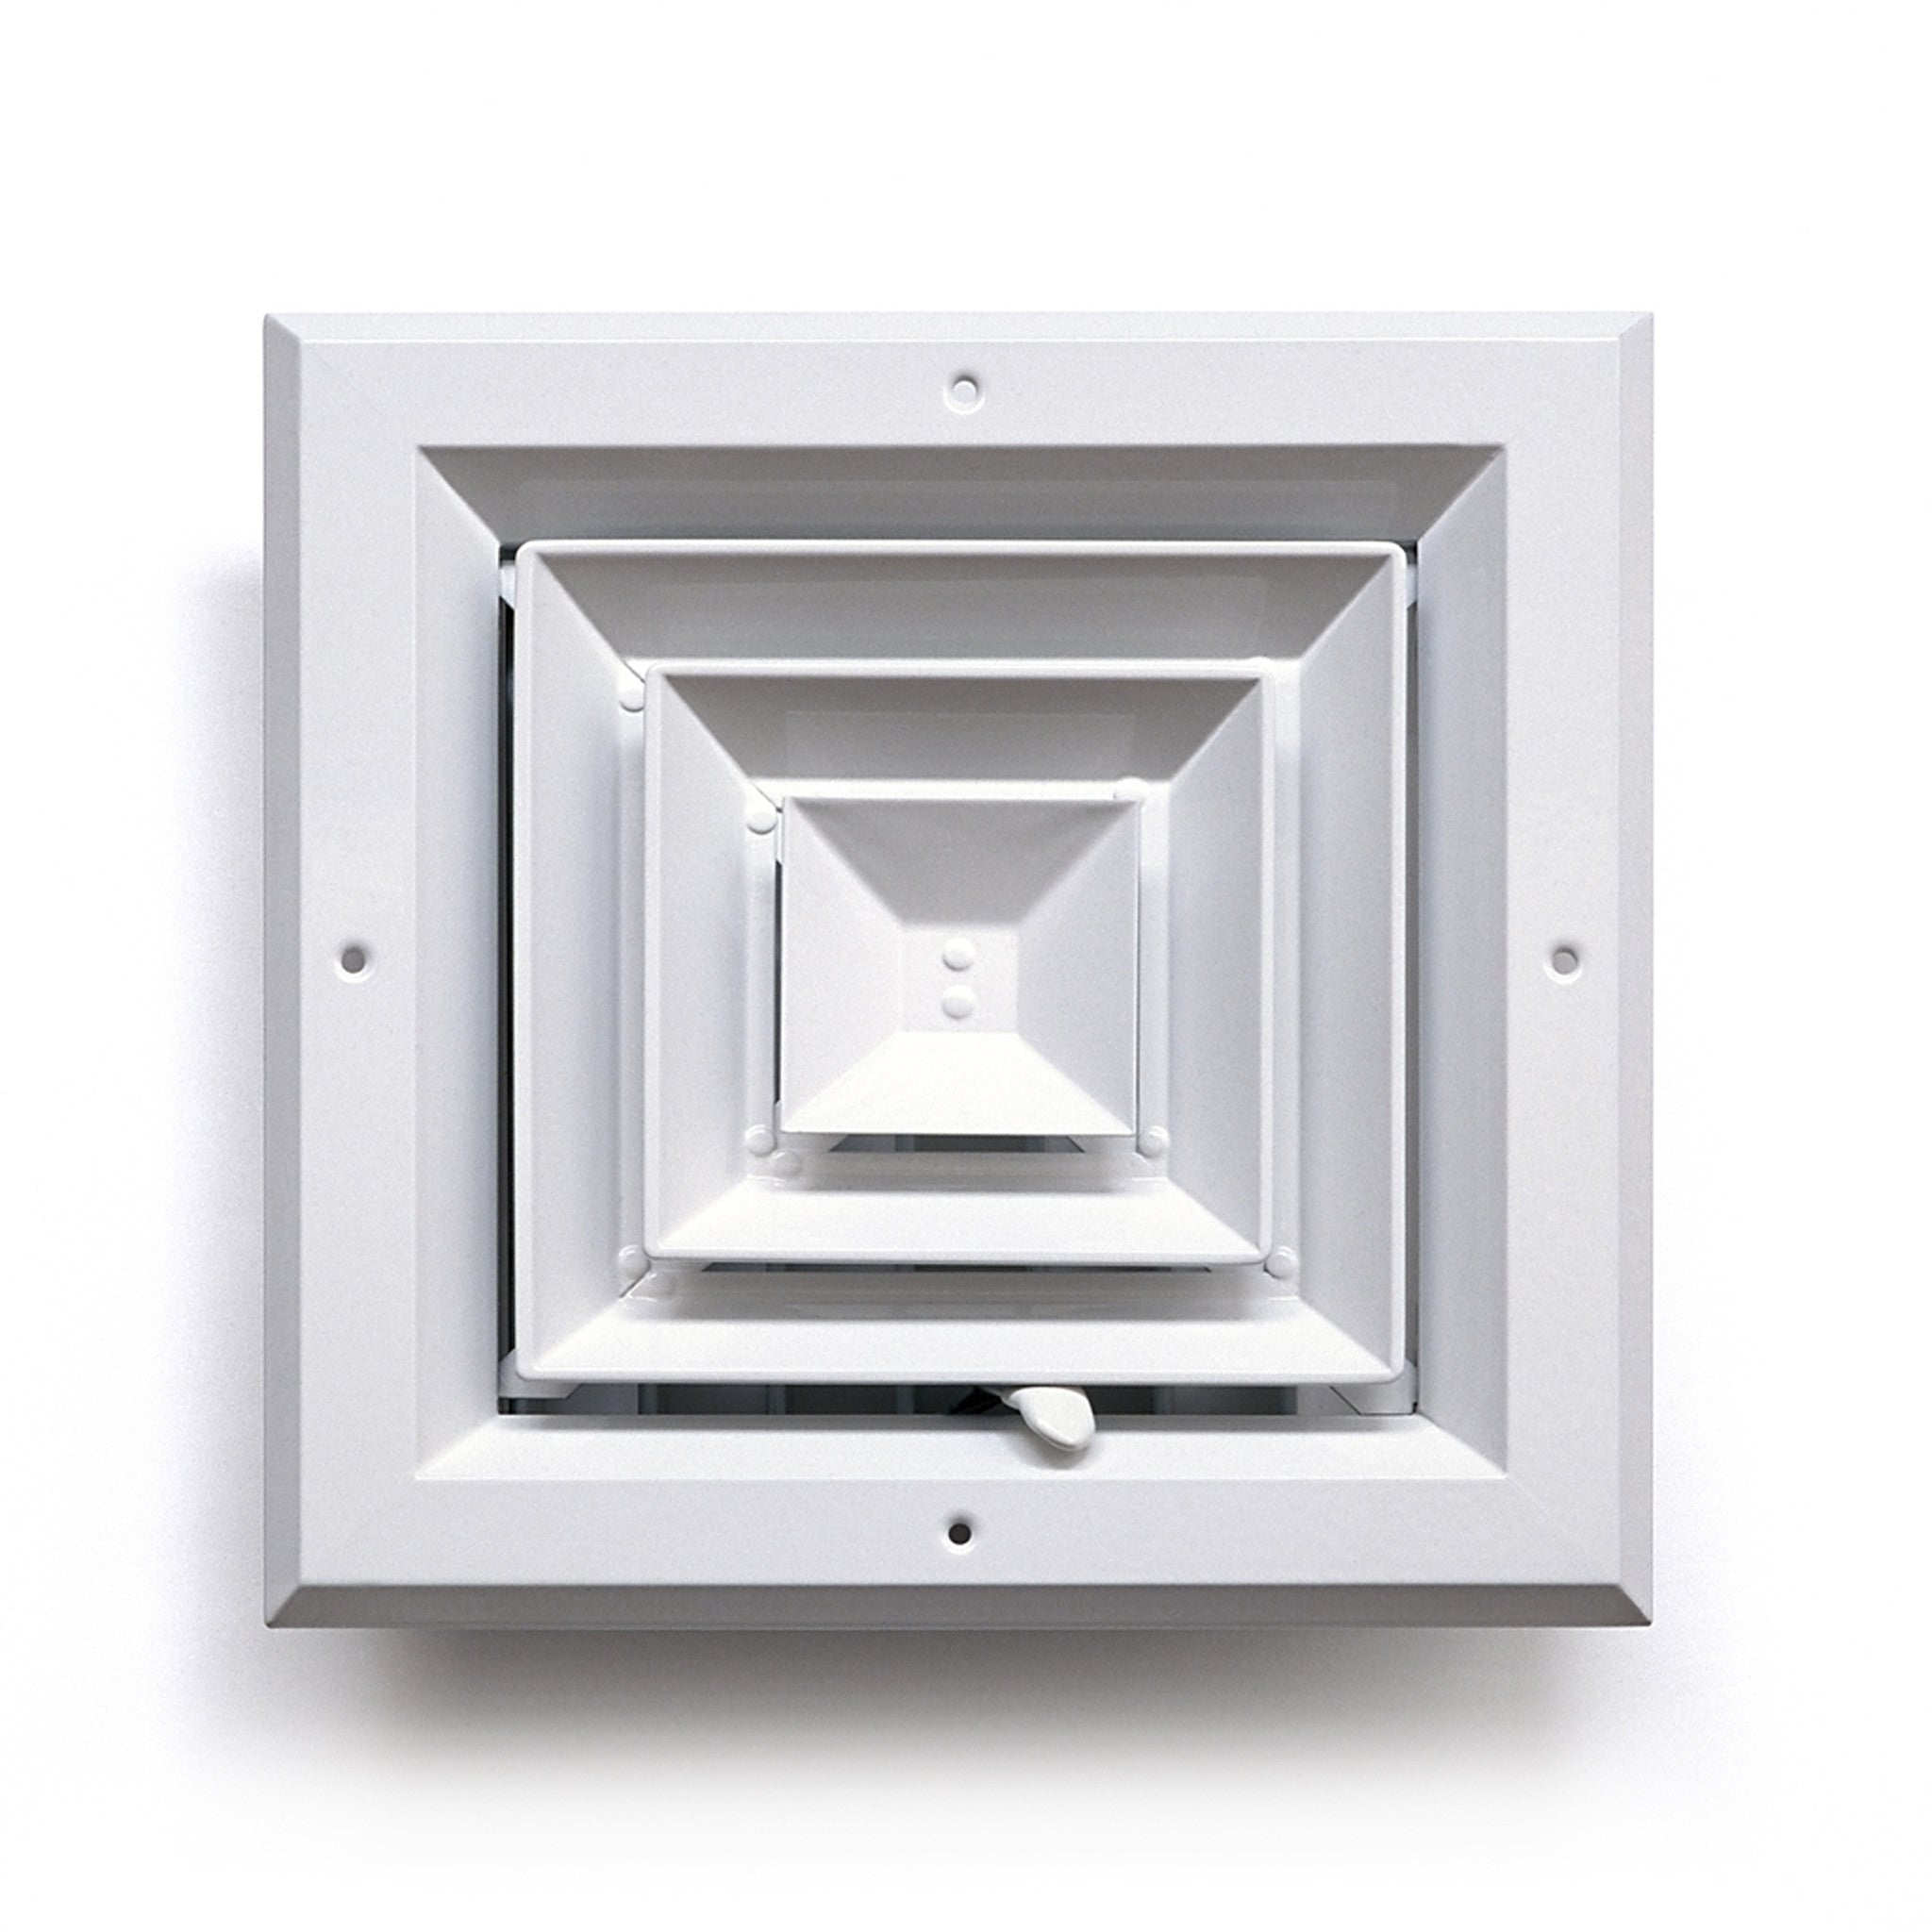 Square Ceiling Diffuser 4 Way Architectural Grille